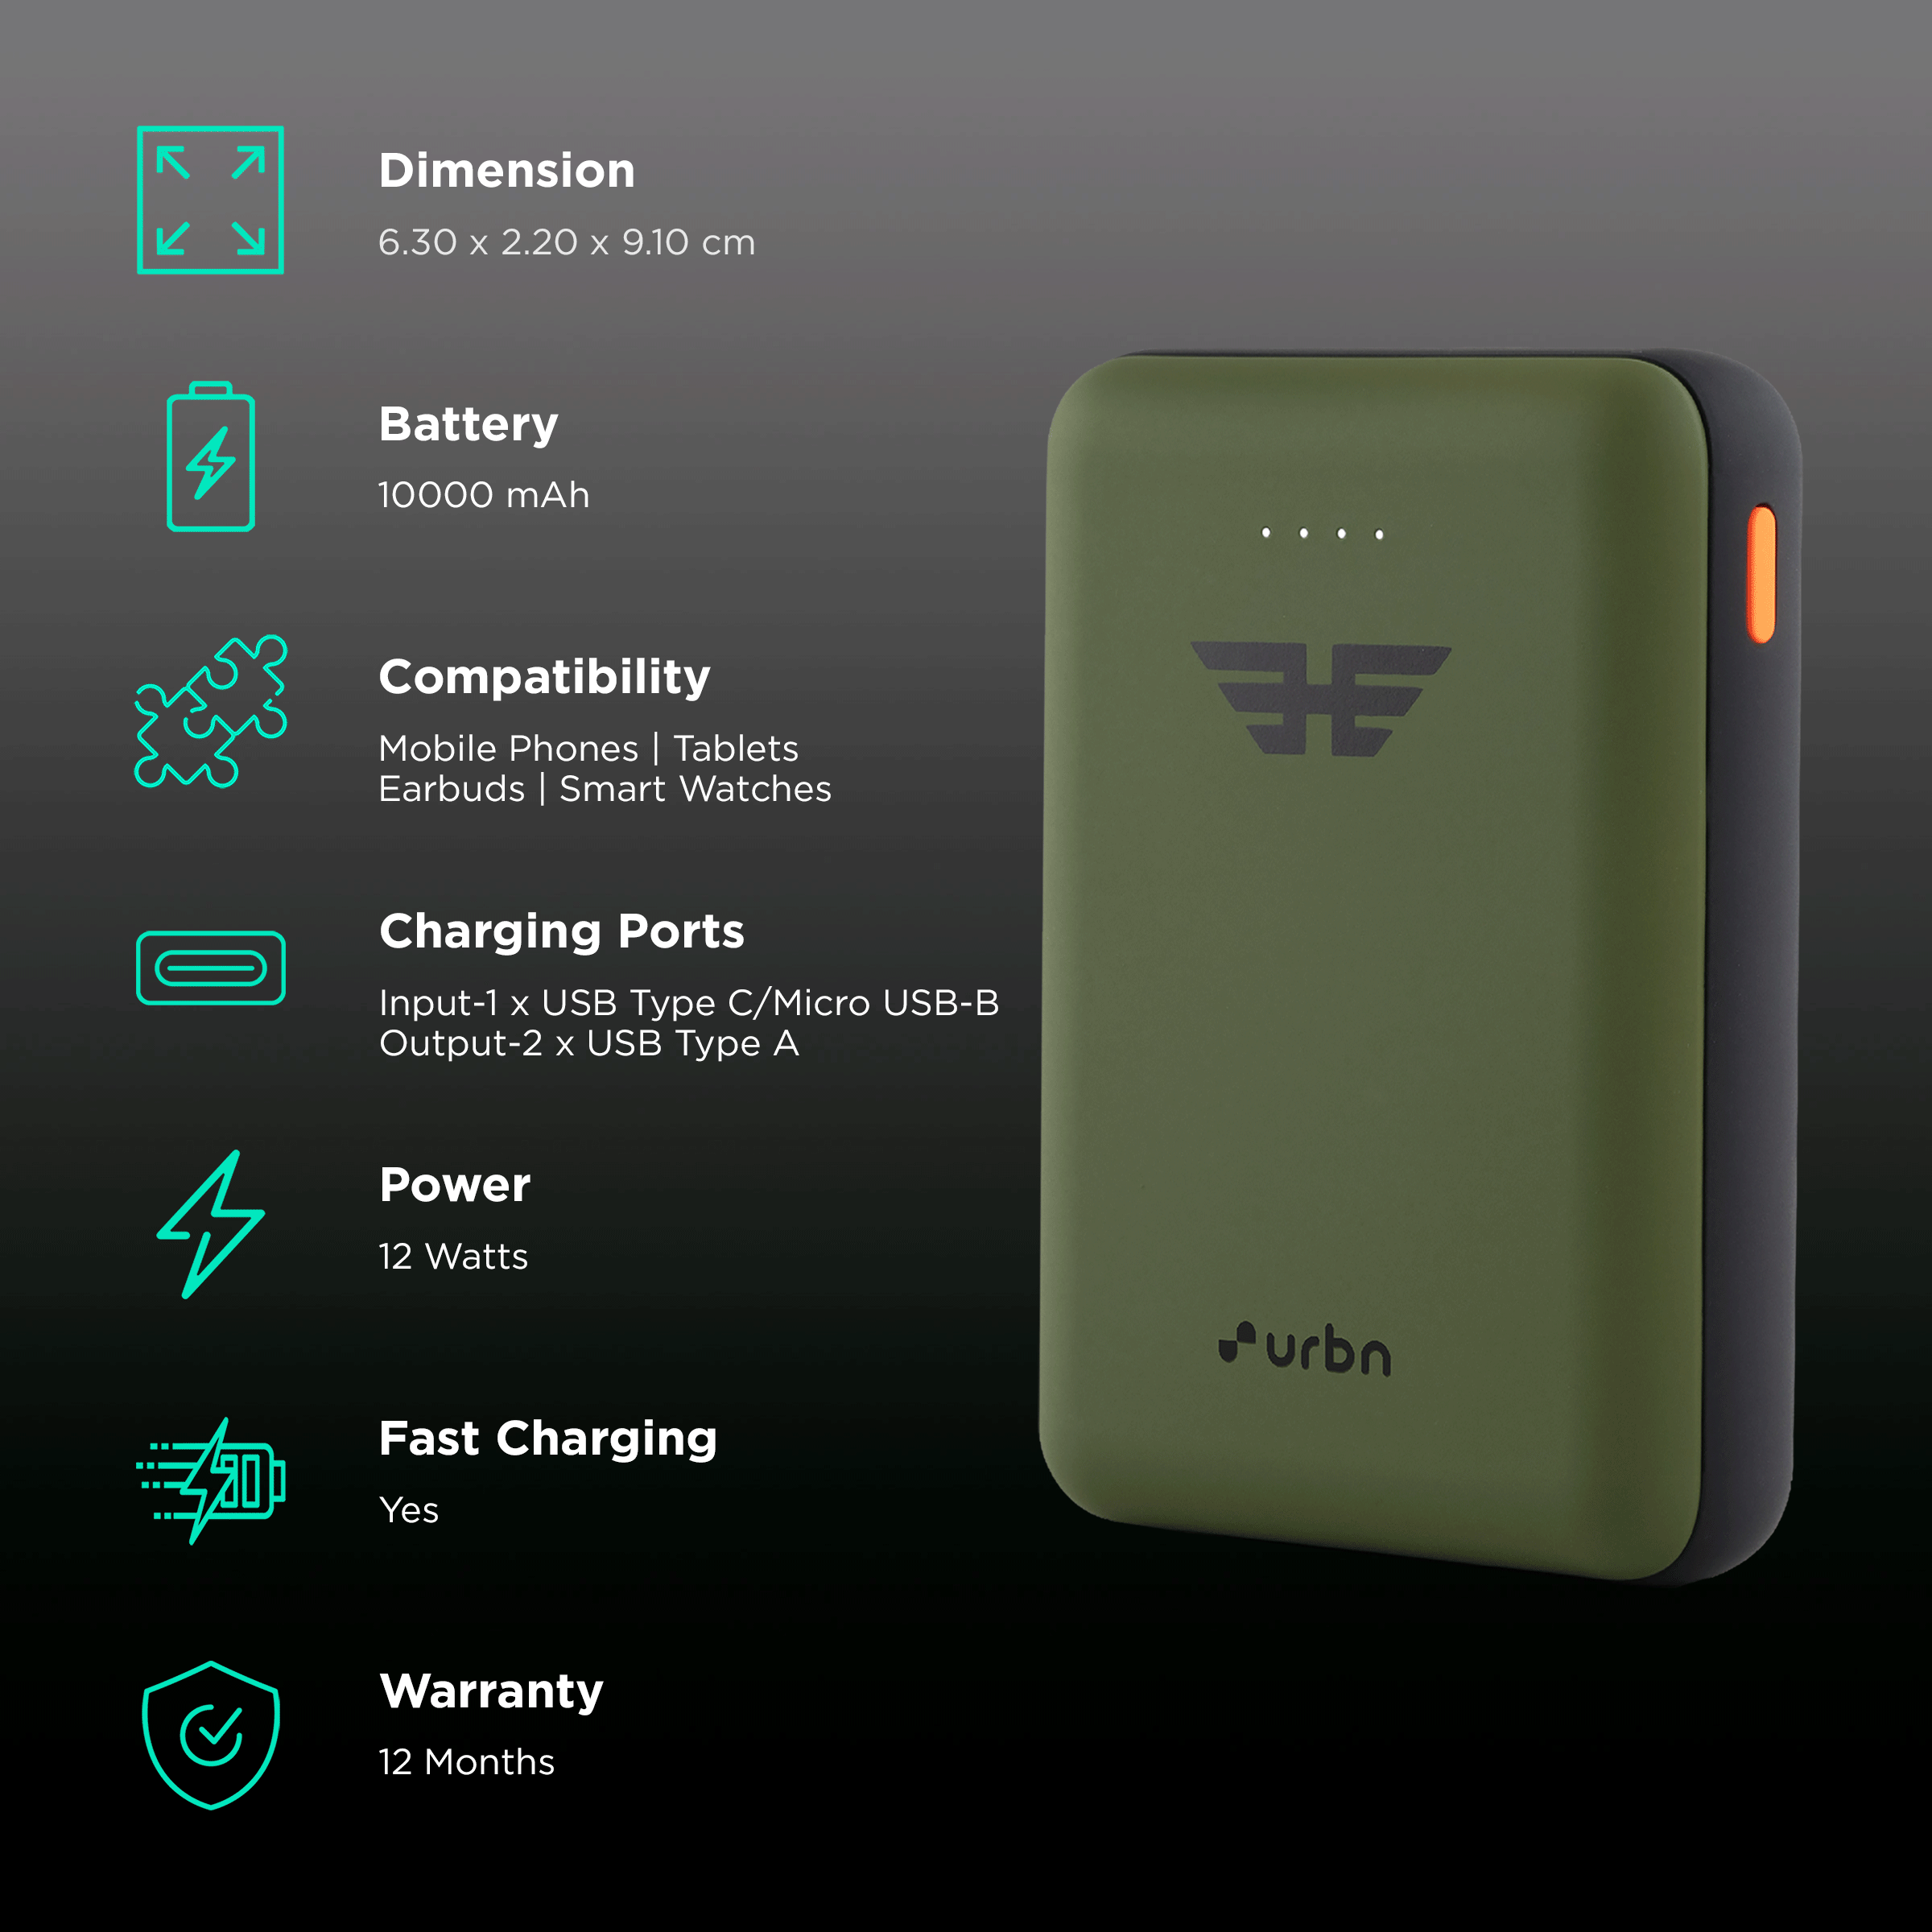 Buy URBN 10000 mAh 12W Fast Charging Power Bank (1 Micro USB Type B, 1 Type  C & 2 Type A Ports, Ultra Compact Casing, LED Charging Indicator, Camo)  Online - Croma